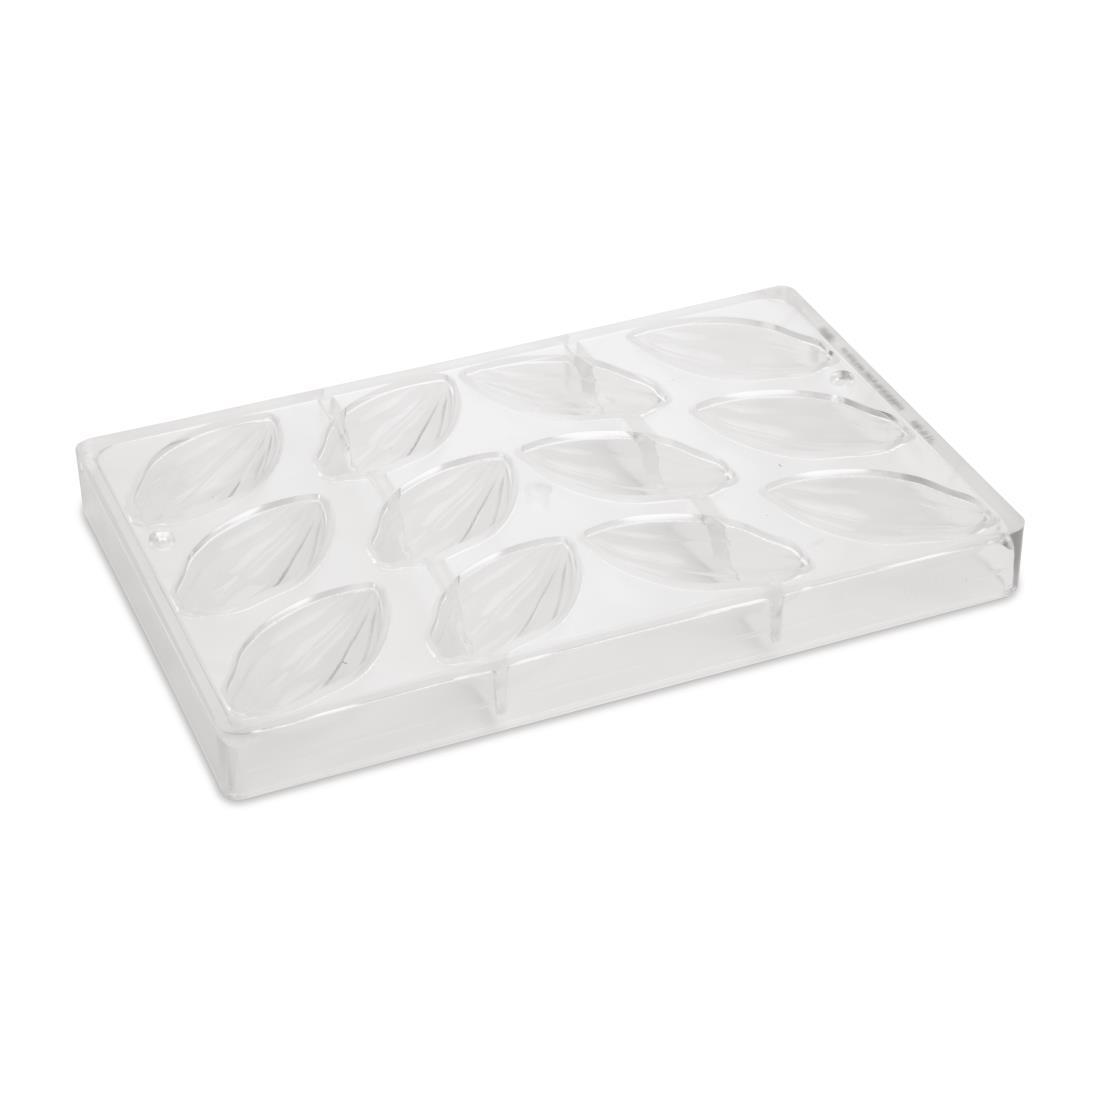 Schneider Chocolate Mould Oval Textures - DW299  - 1